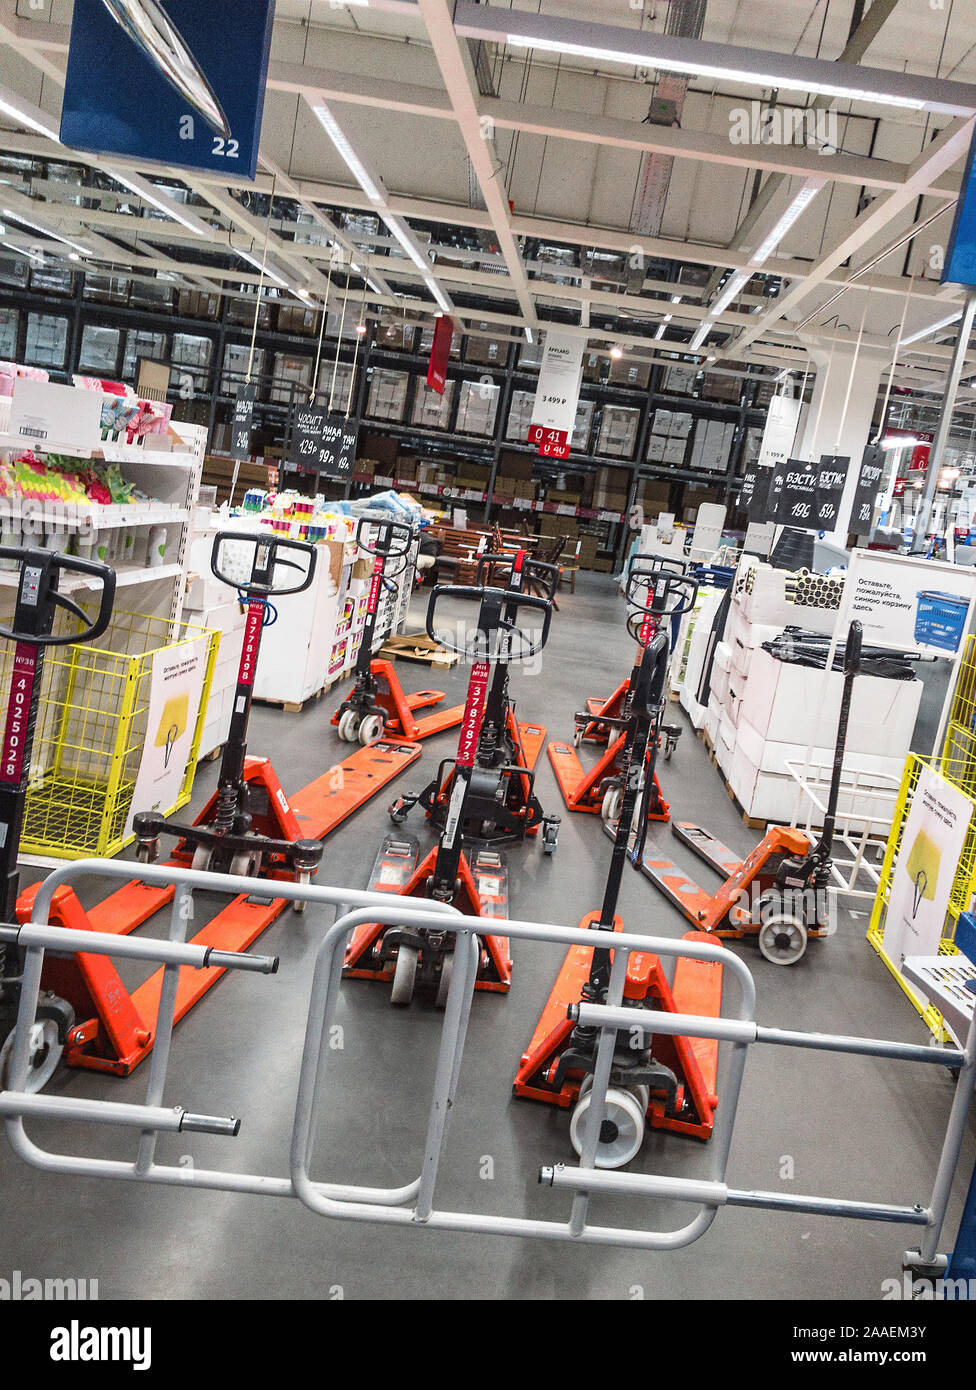 manual pallet trucks parked in furniture store Ikea Stock Photo